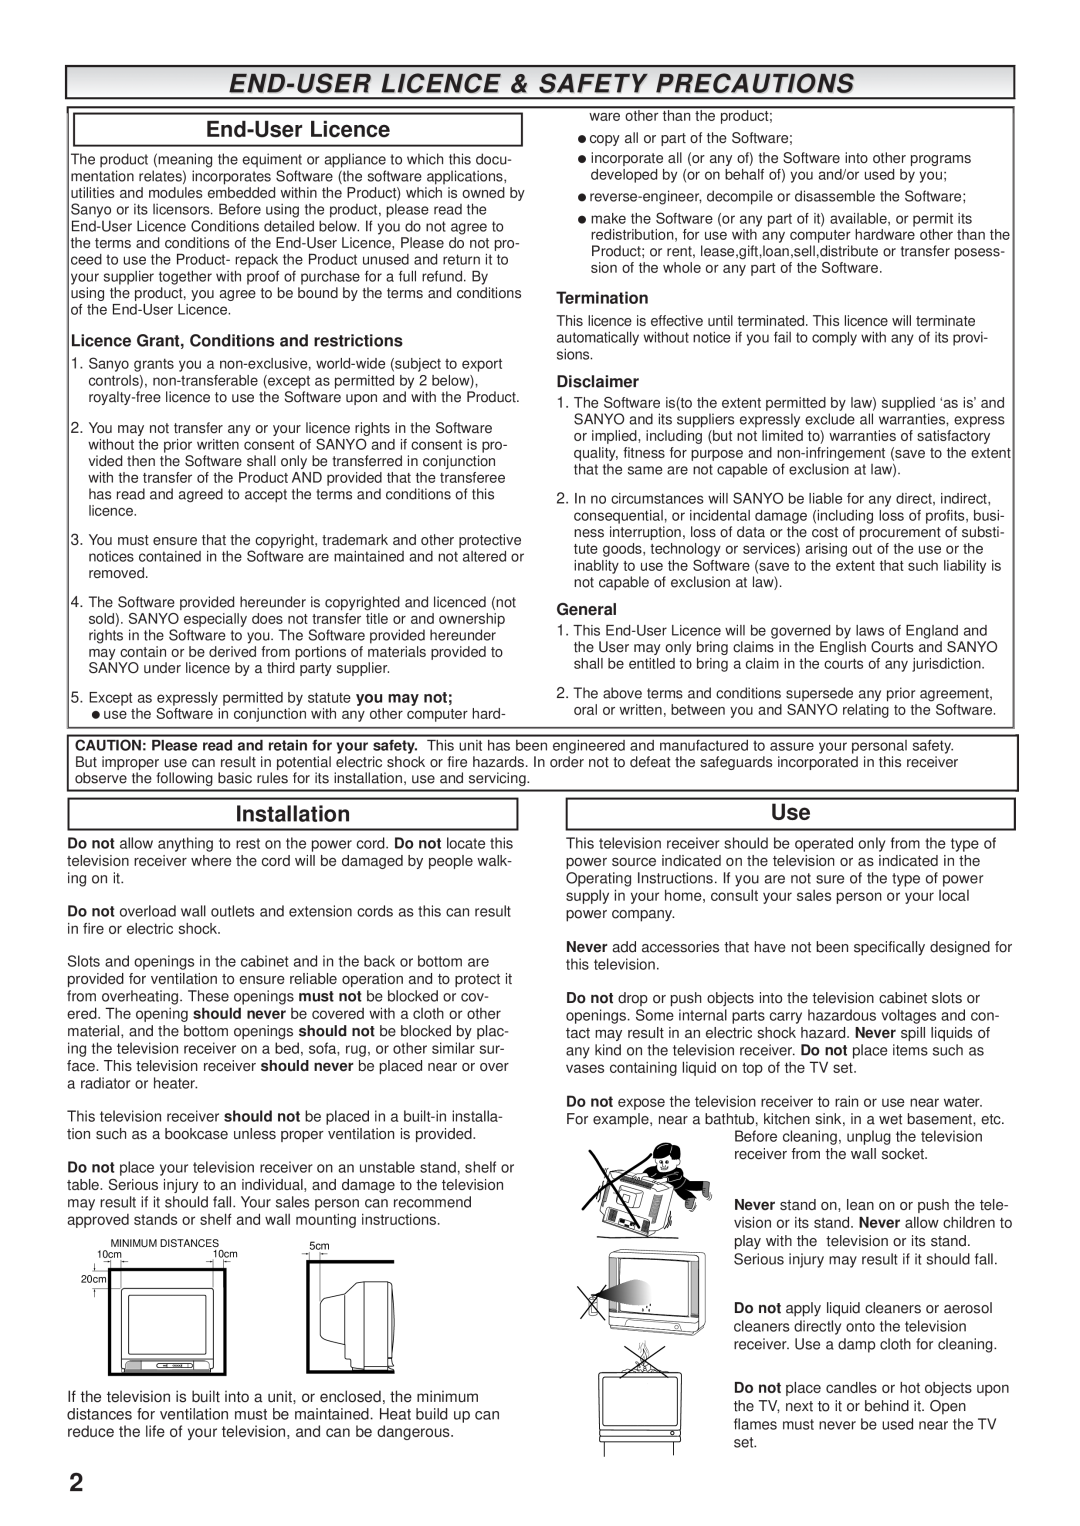 Sanyo CE32DFN2-B instruction manual End-User Licence & Safety Precautions, Installation 